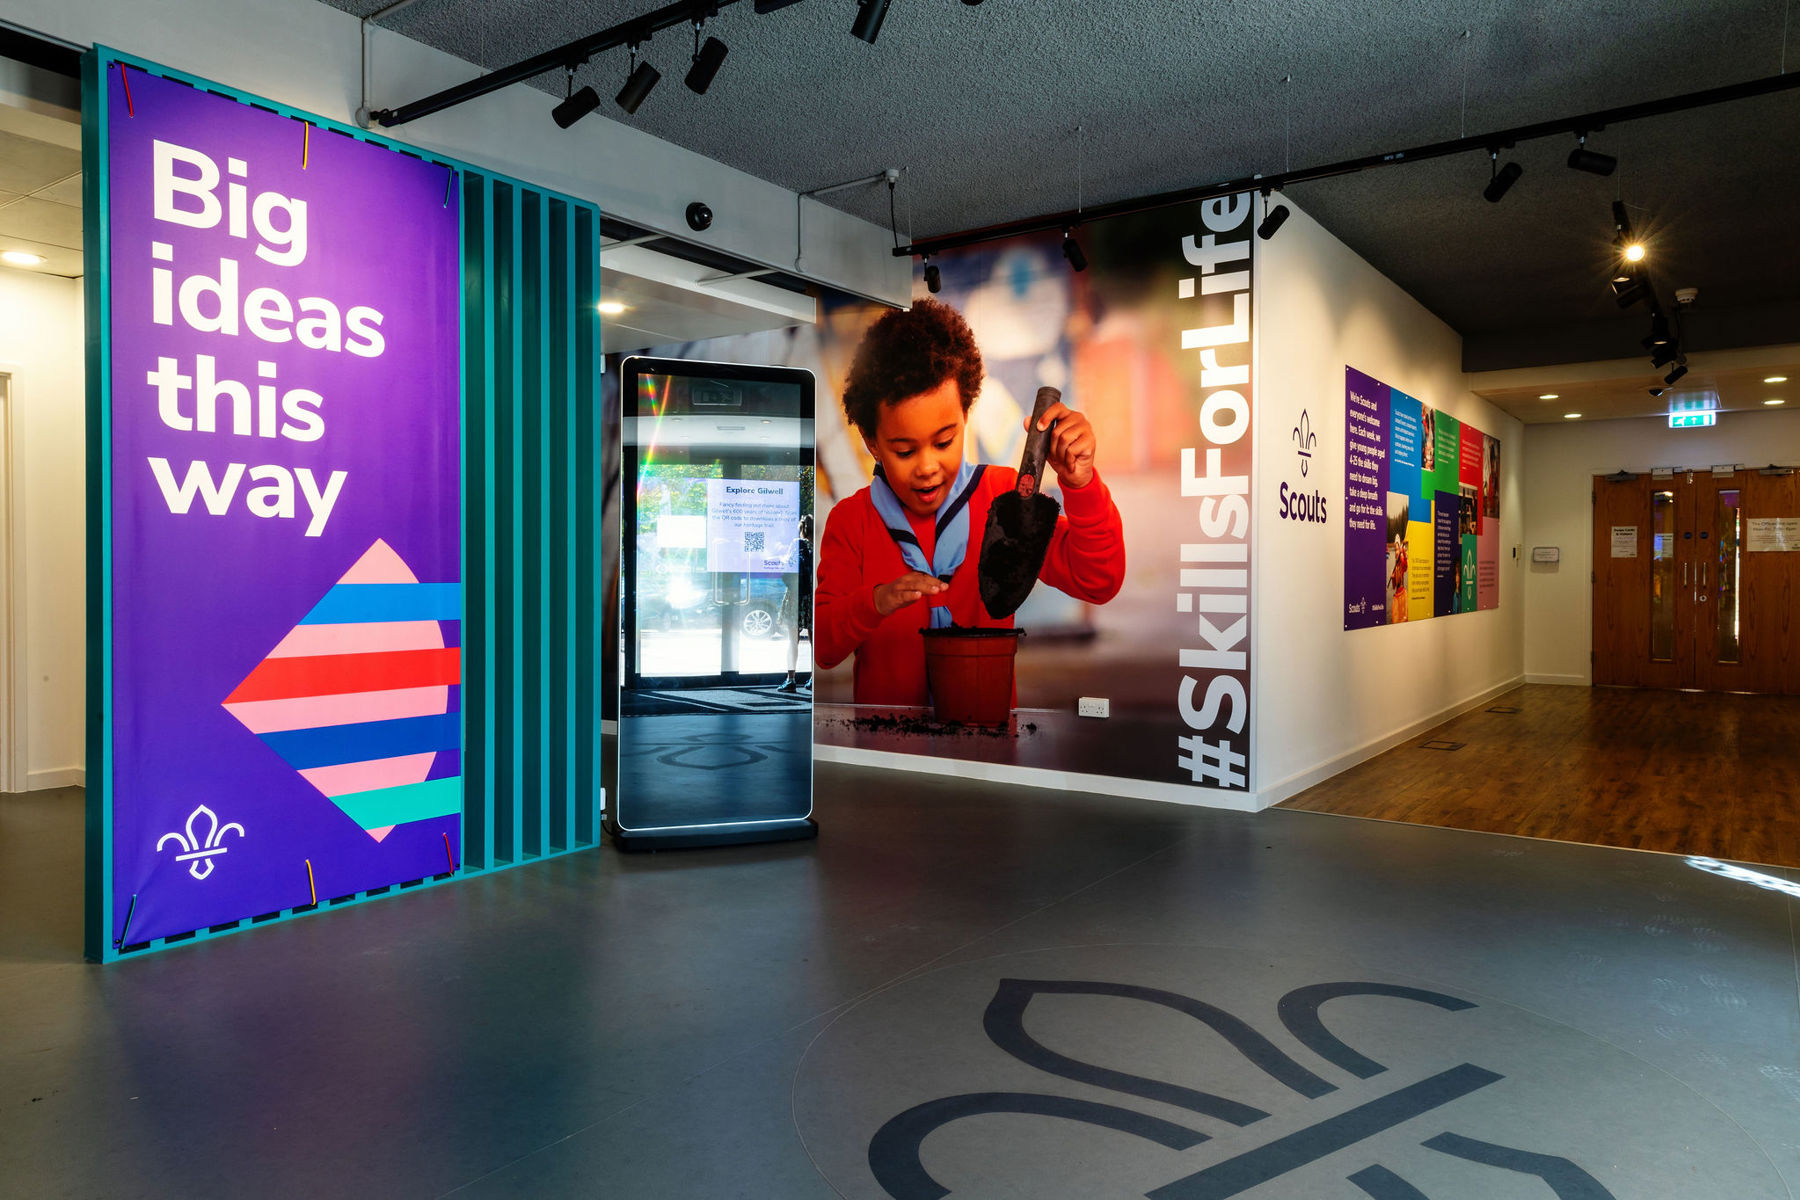 Big ideas this way, #SkillsForLife and an image of a Squirrel Scout in the colourful Gilwell space